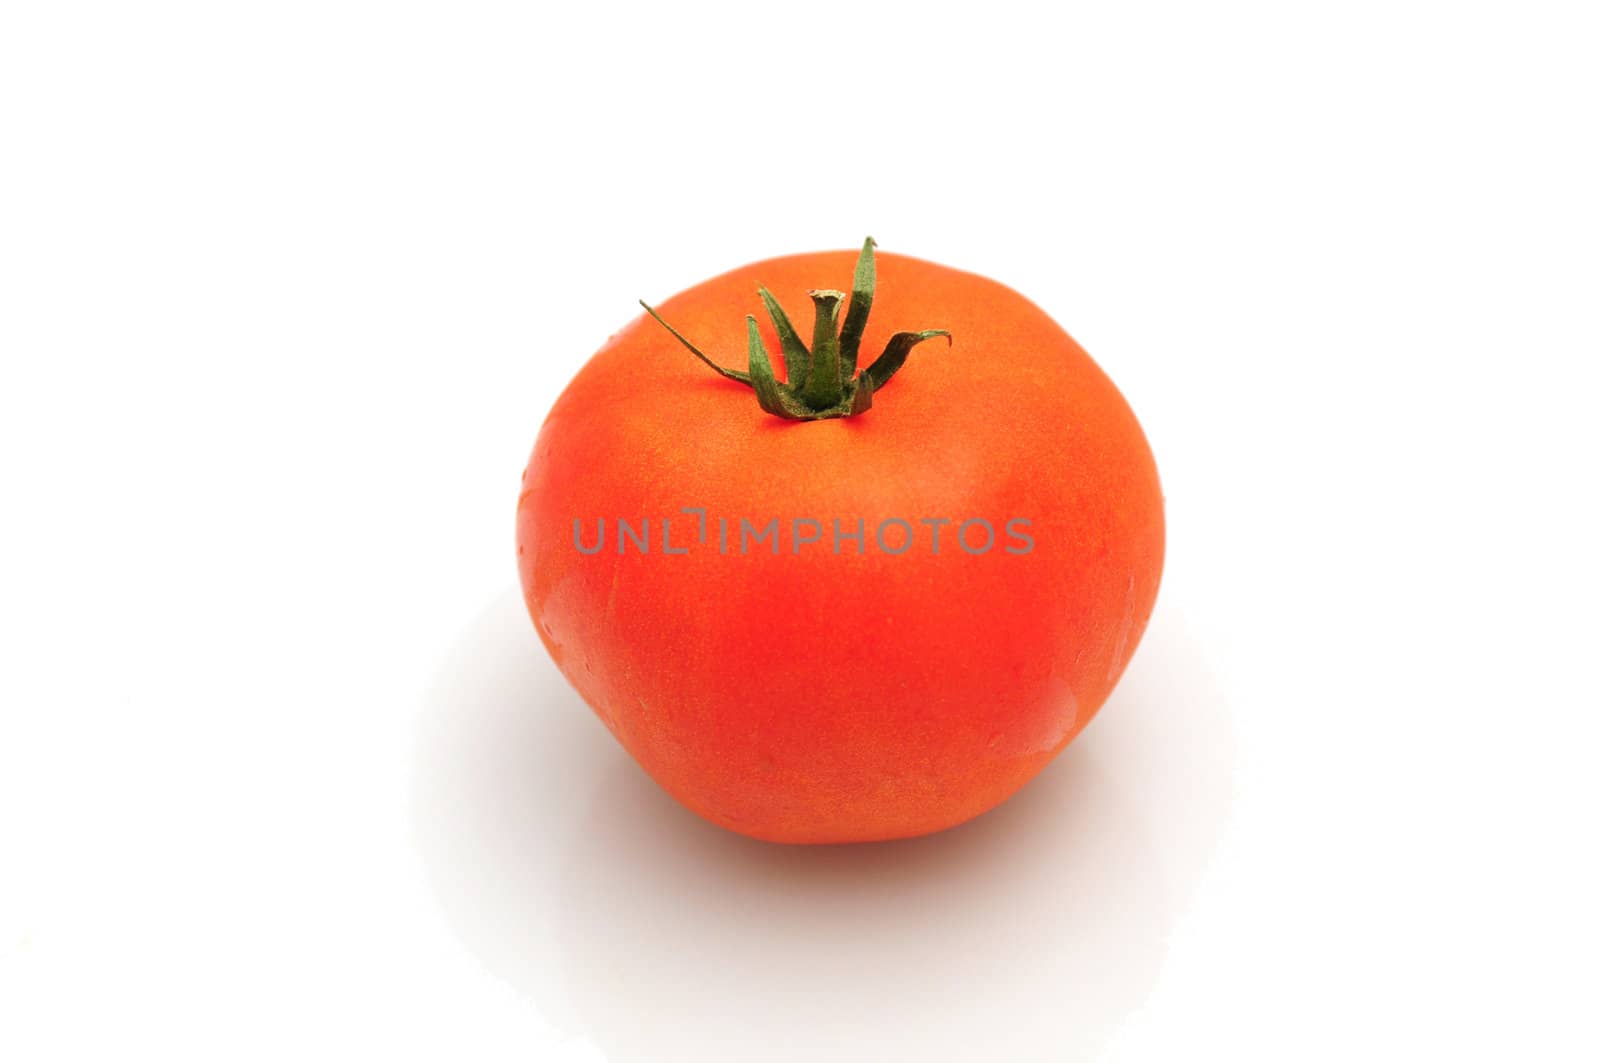 Red tomato on white background by ftlaudgirl